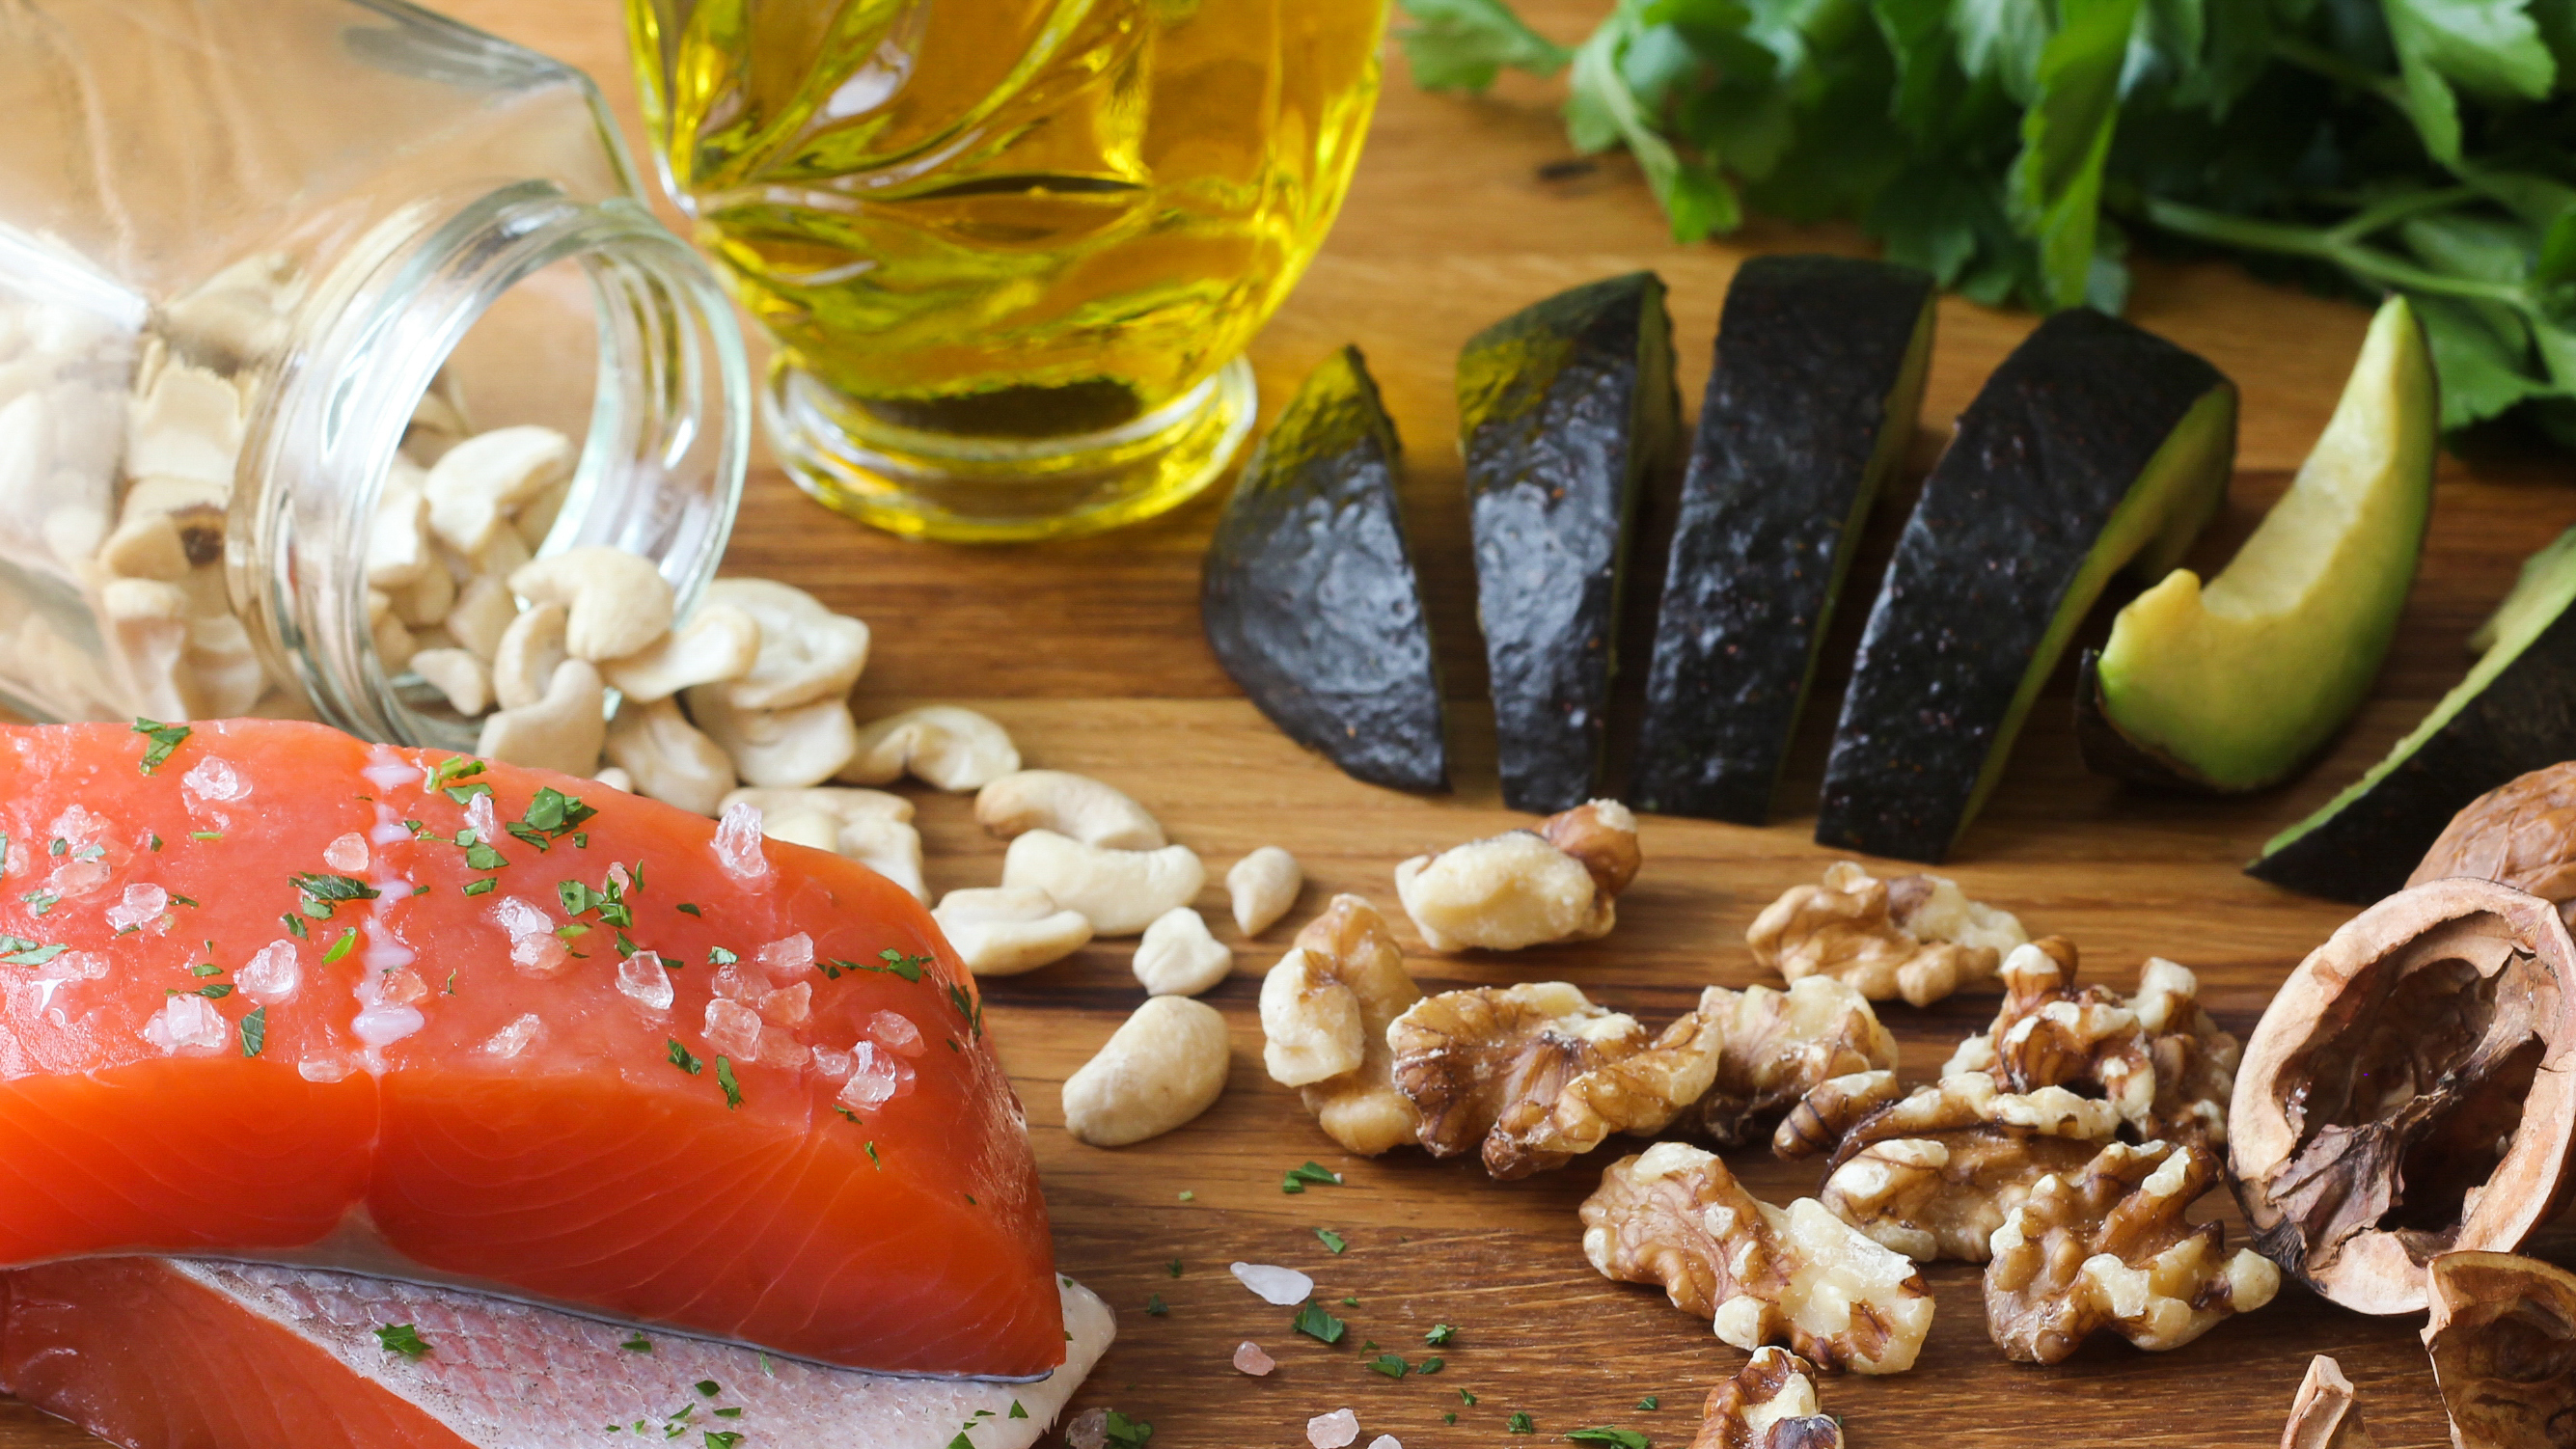 Deep sea fish, avocado, nuts and olive oil are some of the sources of Omega 3 that protect the heart (Getty)